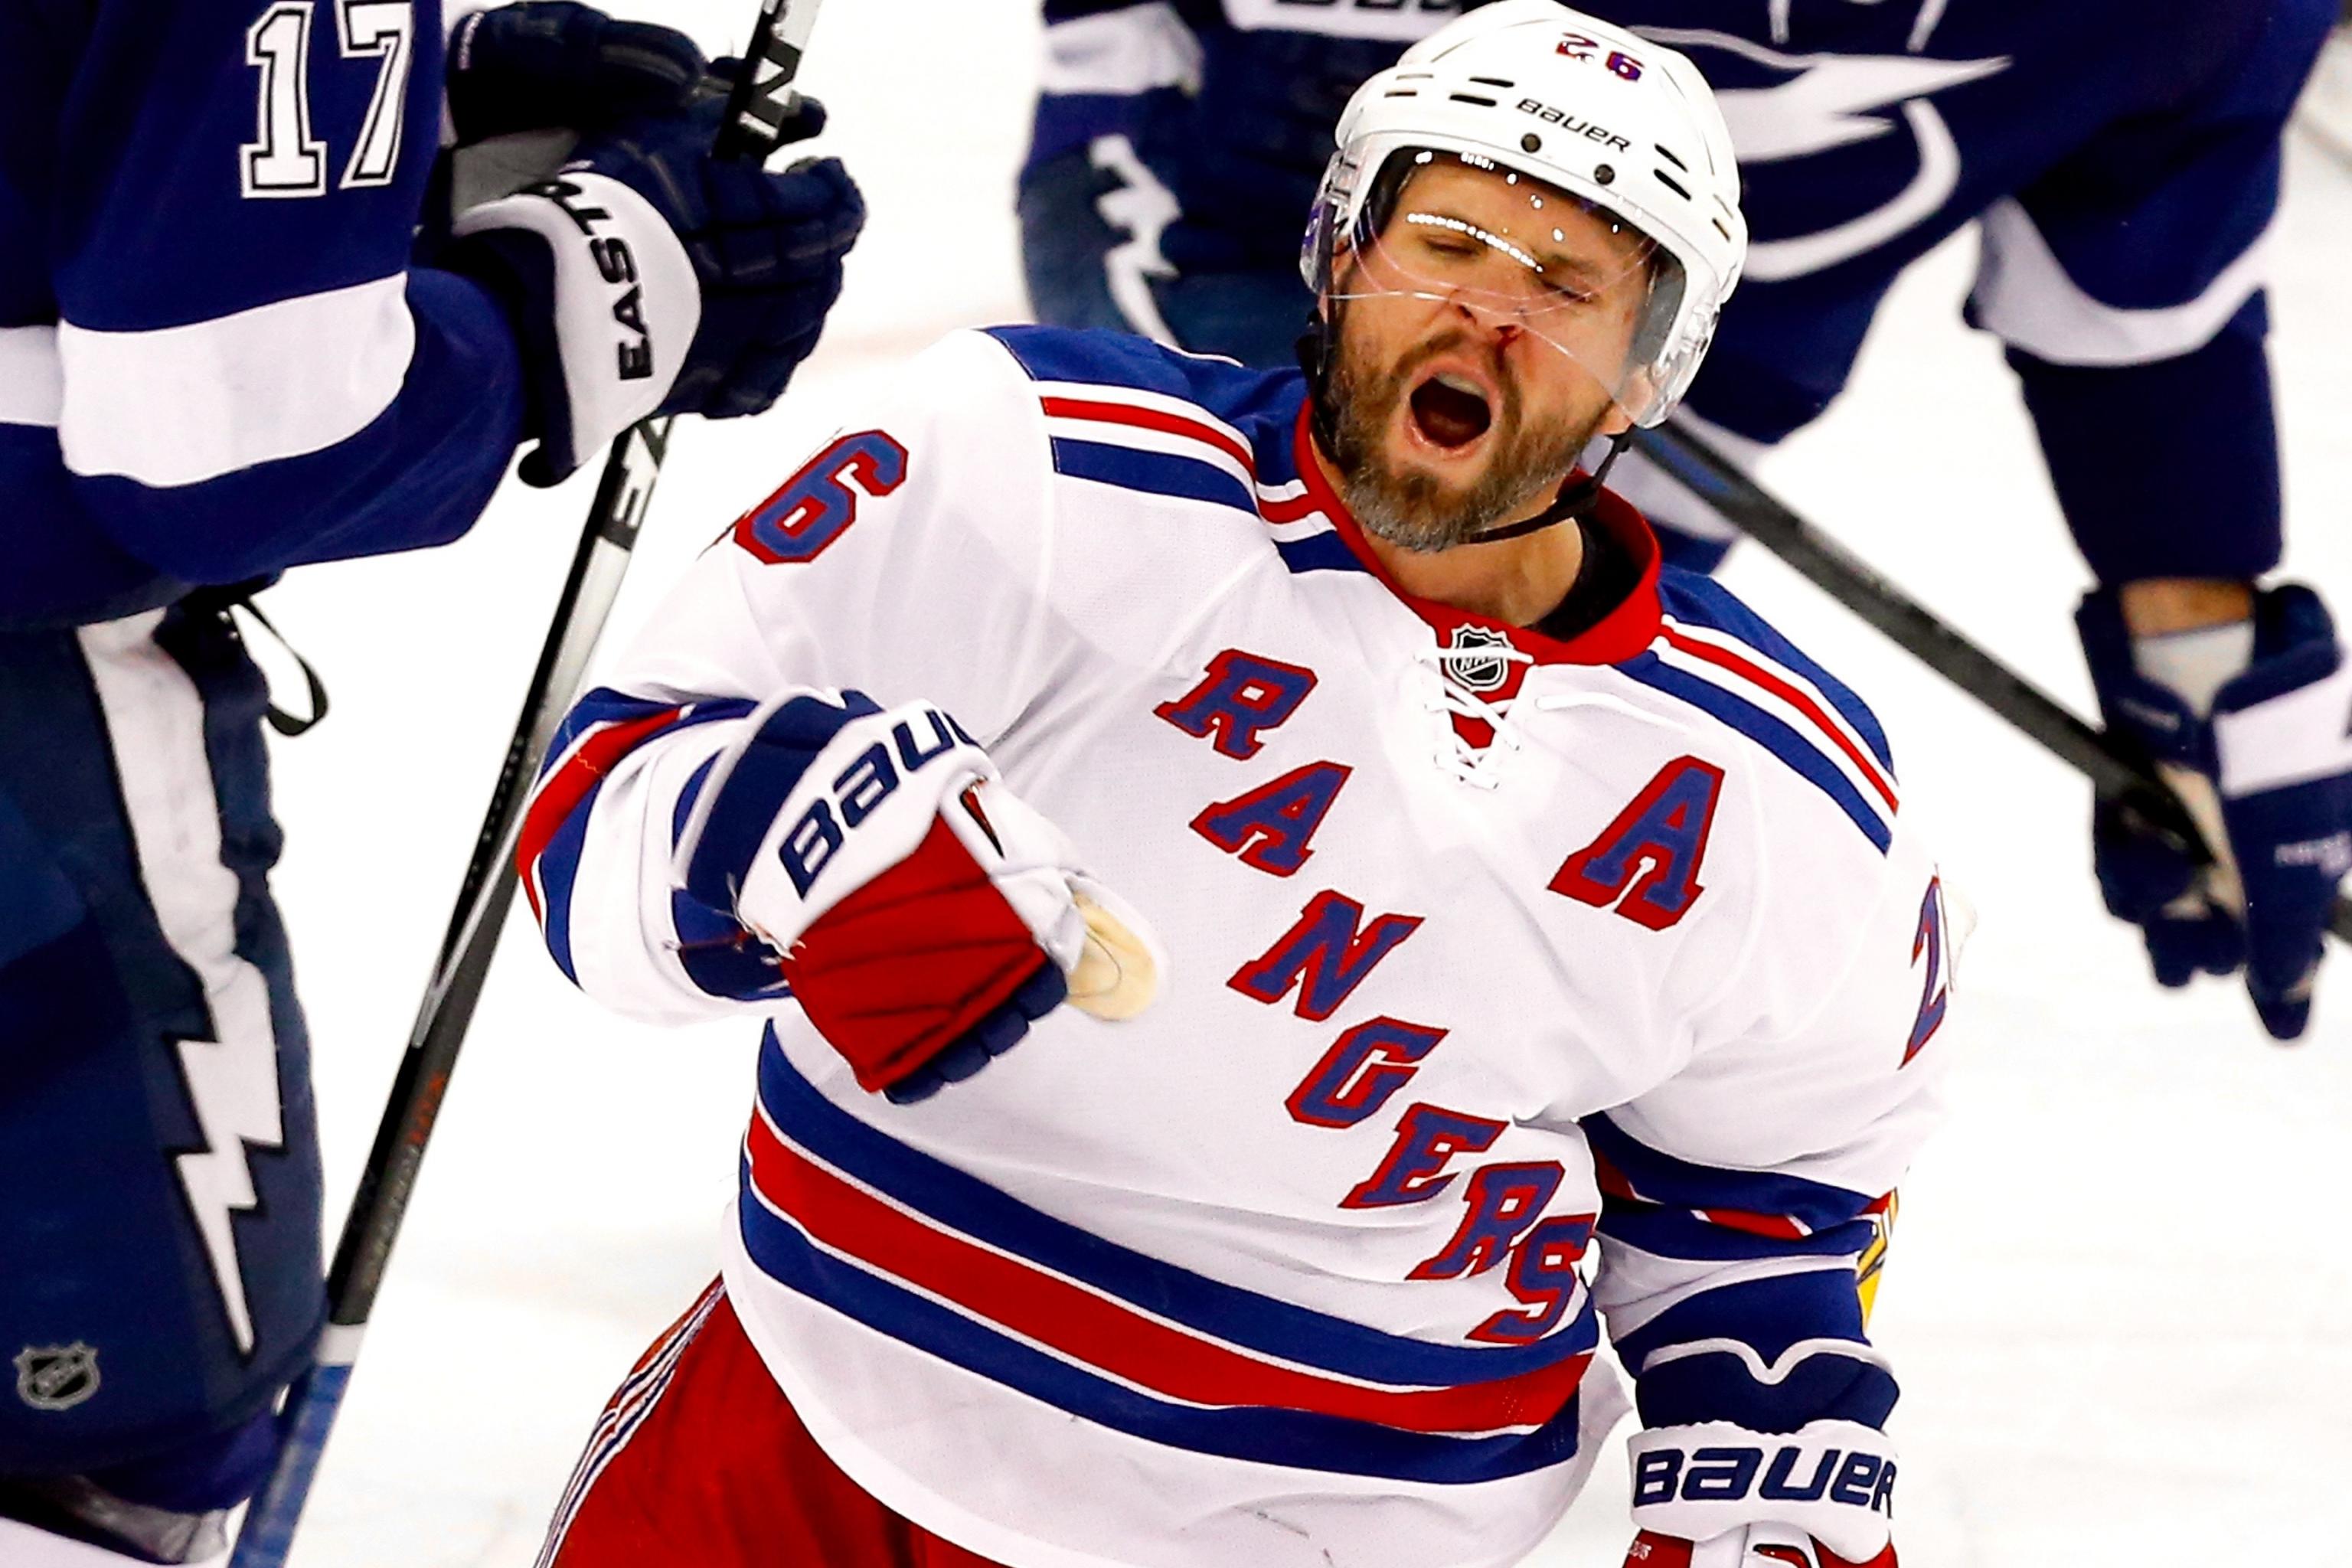 NHL rumors: Martin St. Louis asked for trade from Lightning last